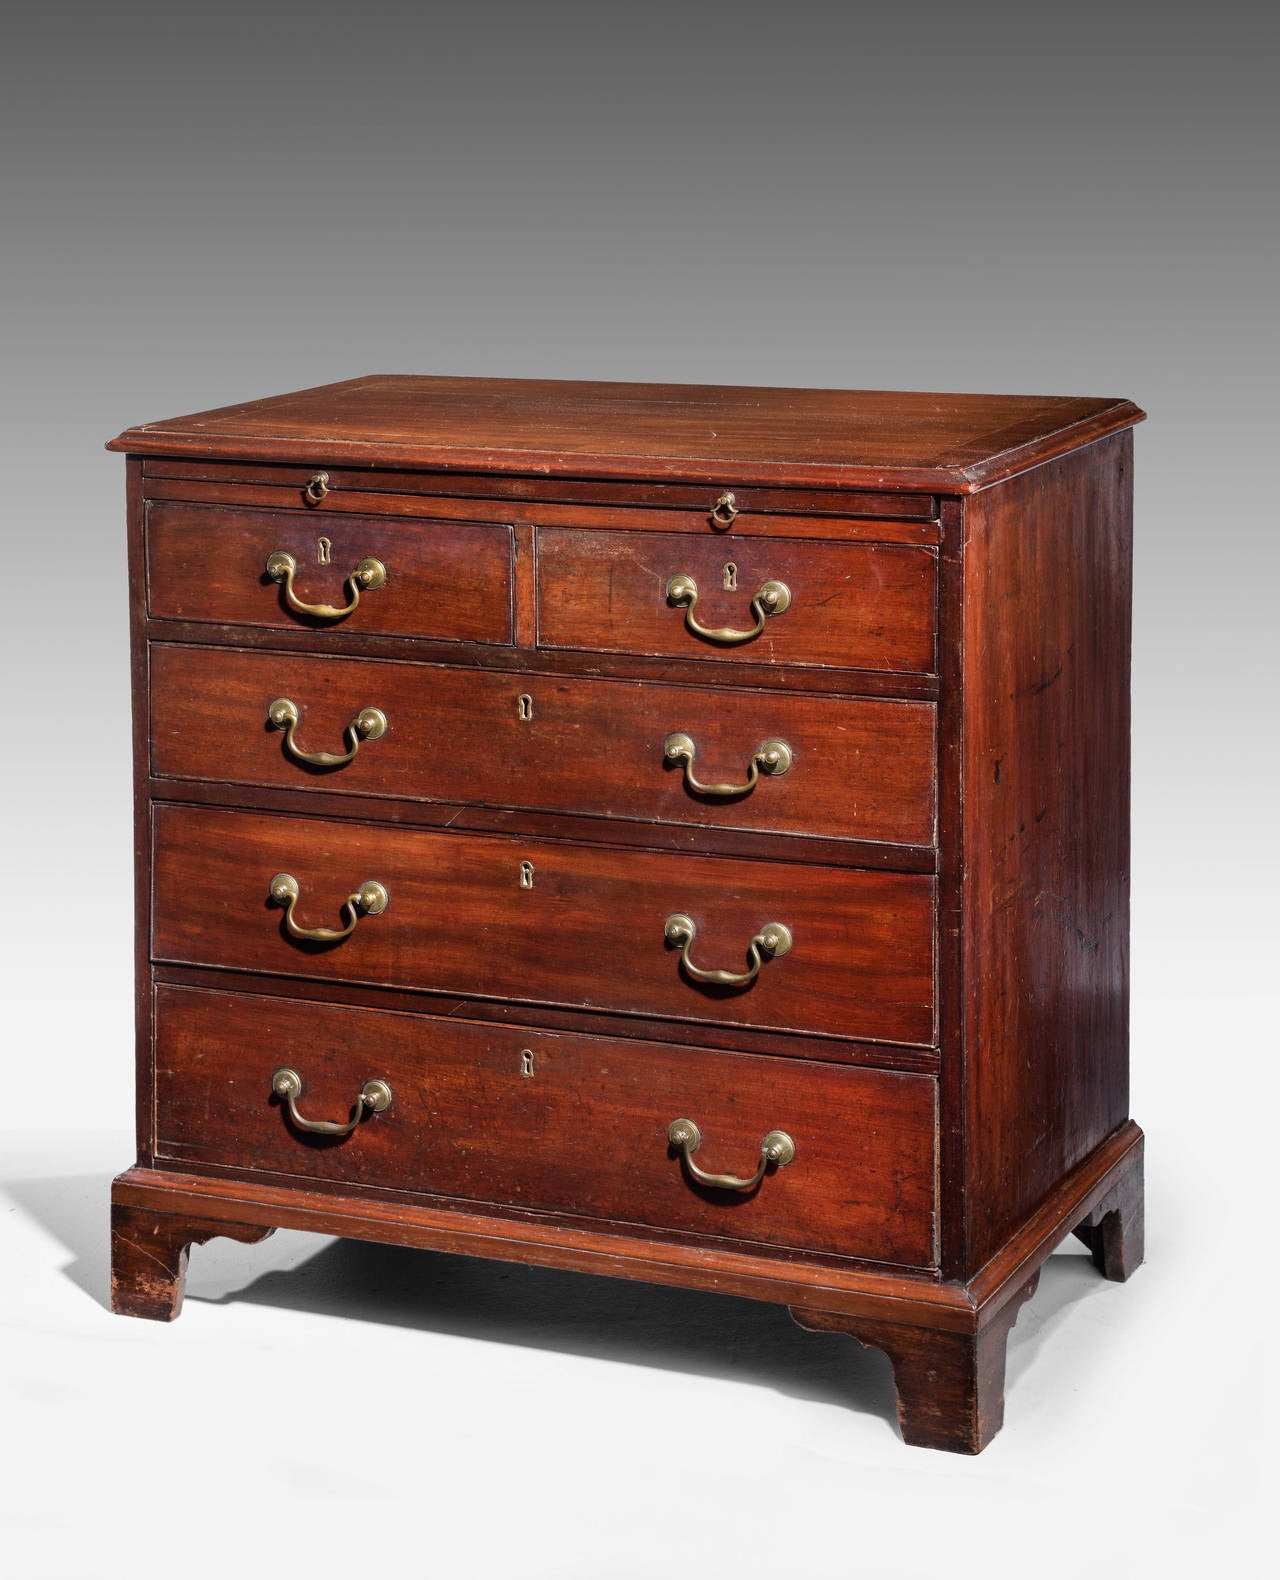 An attractive George III period chest of drawers on bracket feet. With substantial and Period swan necked handles. The top incorporating a dressing slide. The top surface cross banded.